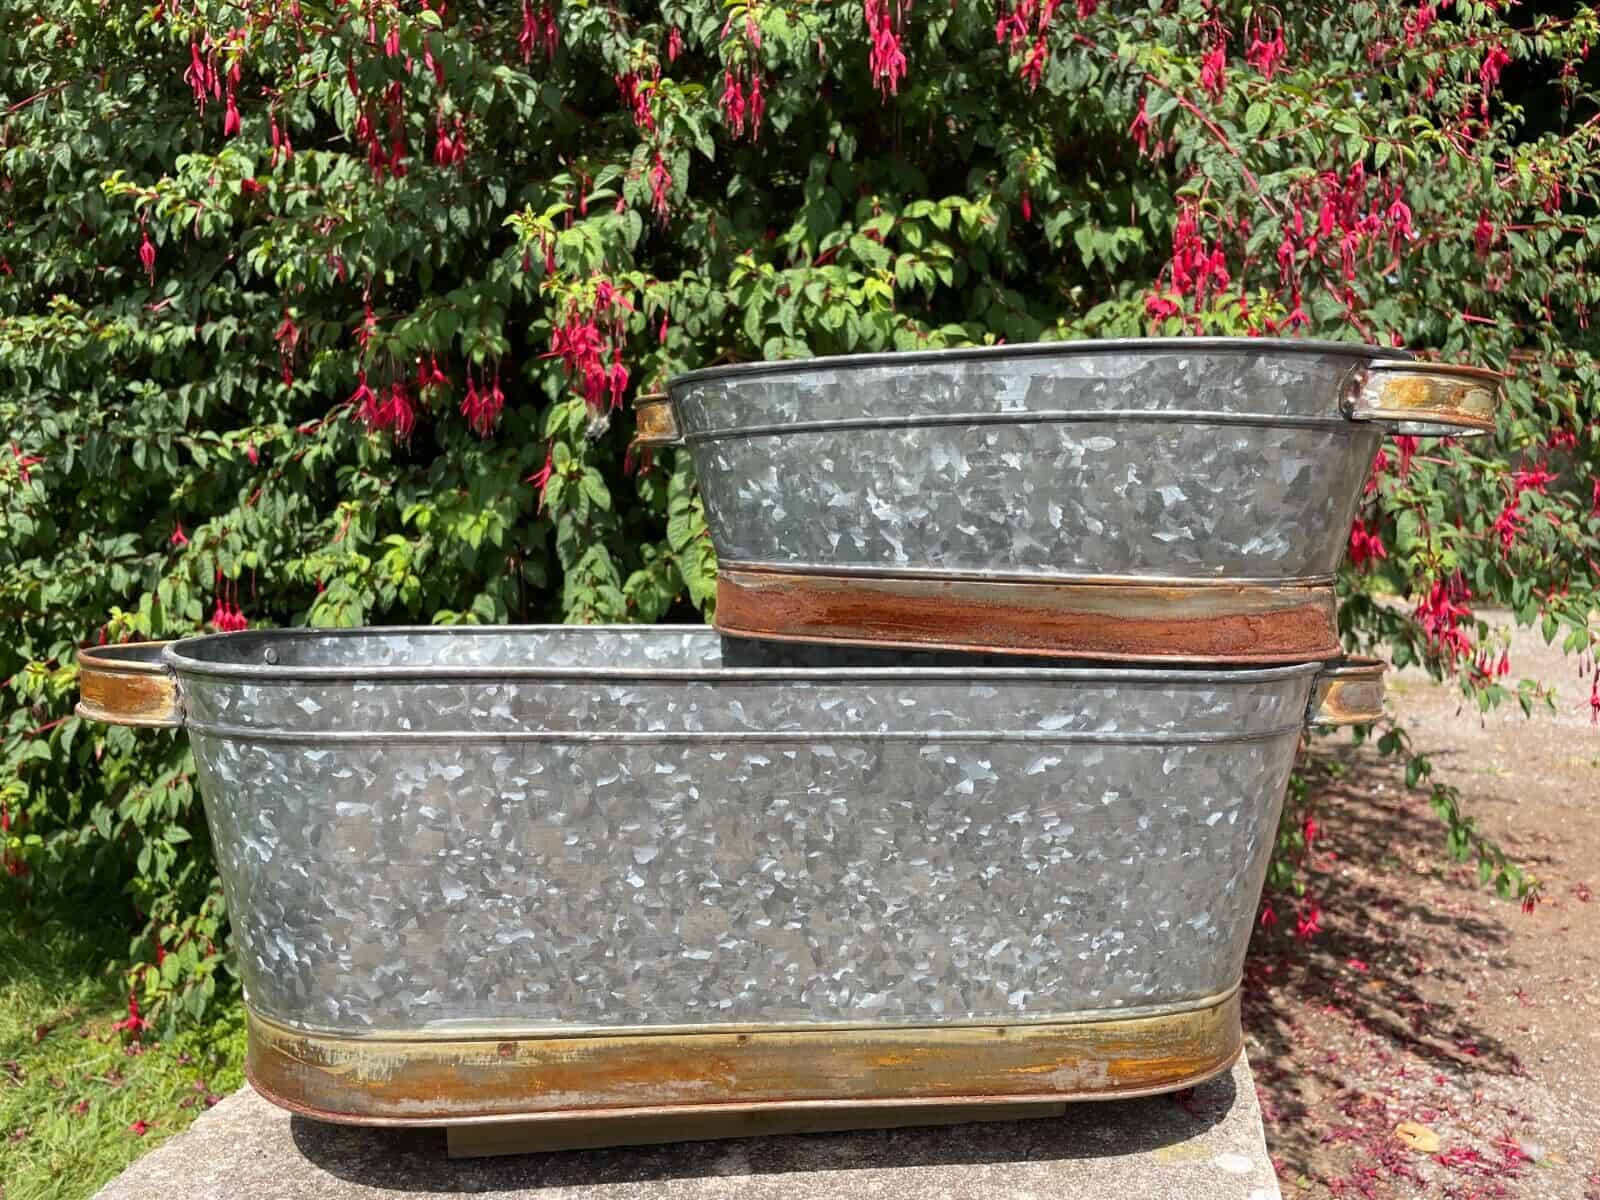 Two planting pots, one large and one smaller sitting on top of the larger. The base of both are wrapped in a copper finish, as are their handles. Situated in a British garden